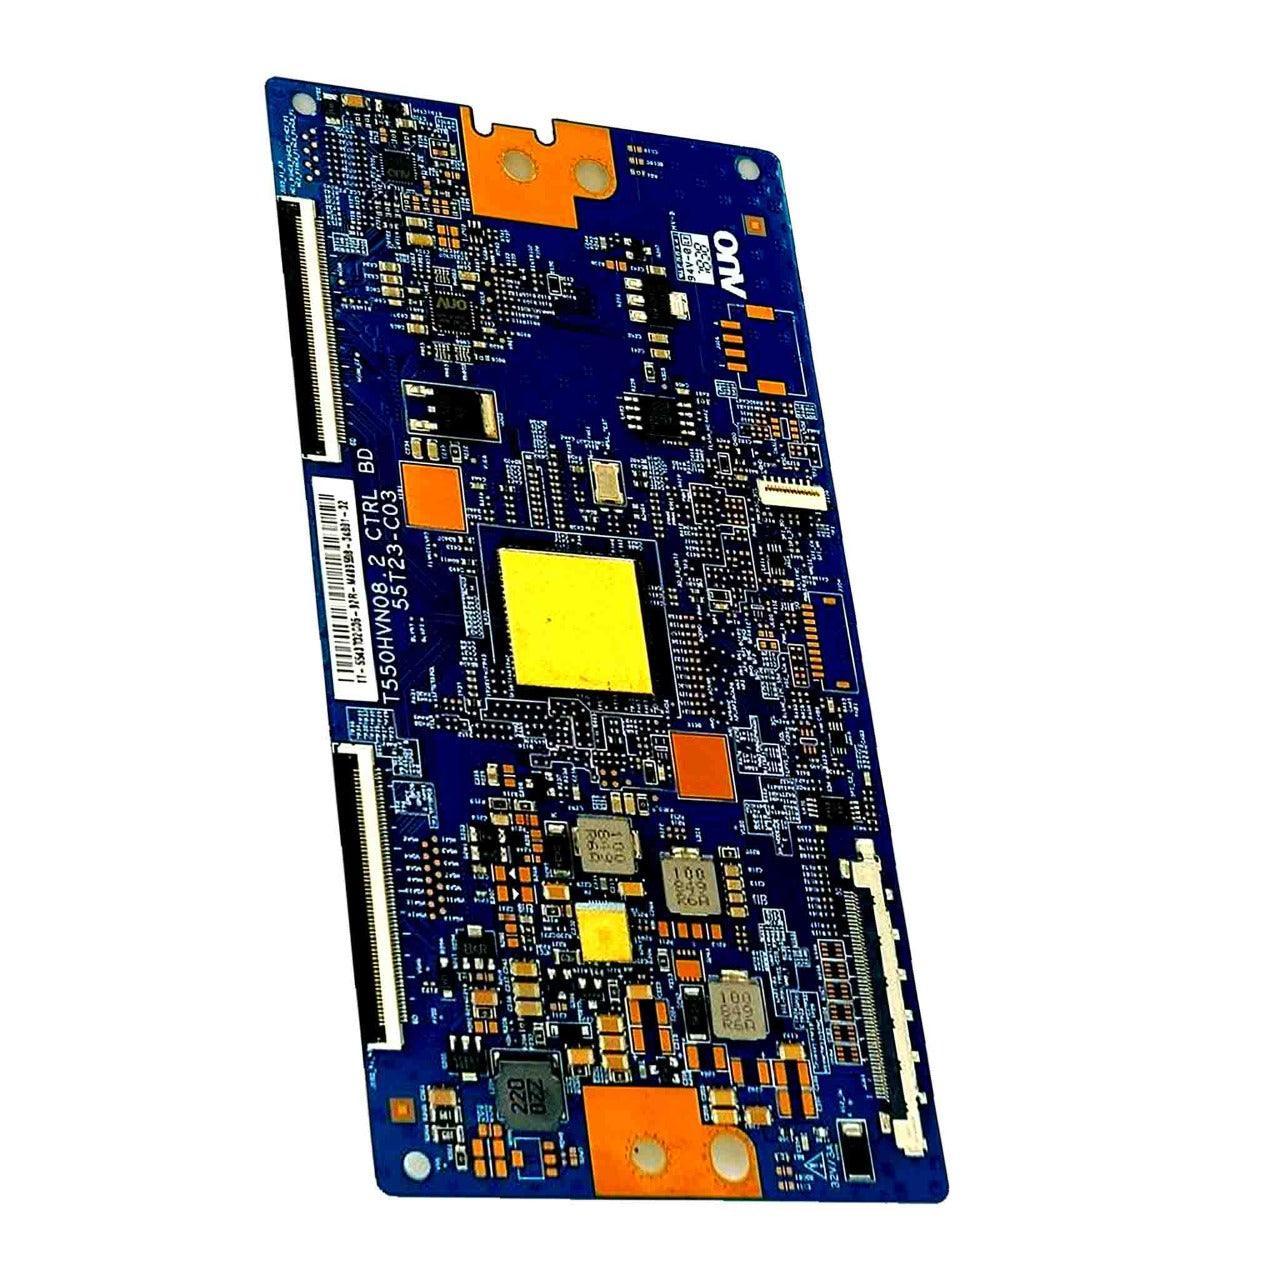 Tcon Board suitable for Sony Led TV Model No 50W950D - Faritha